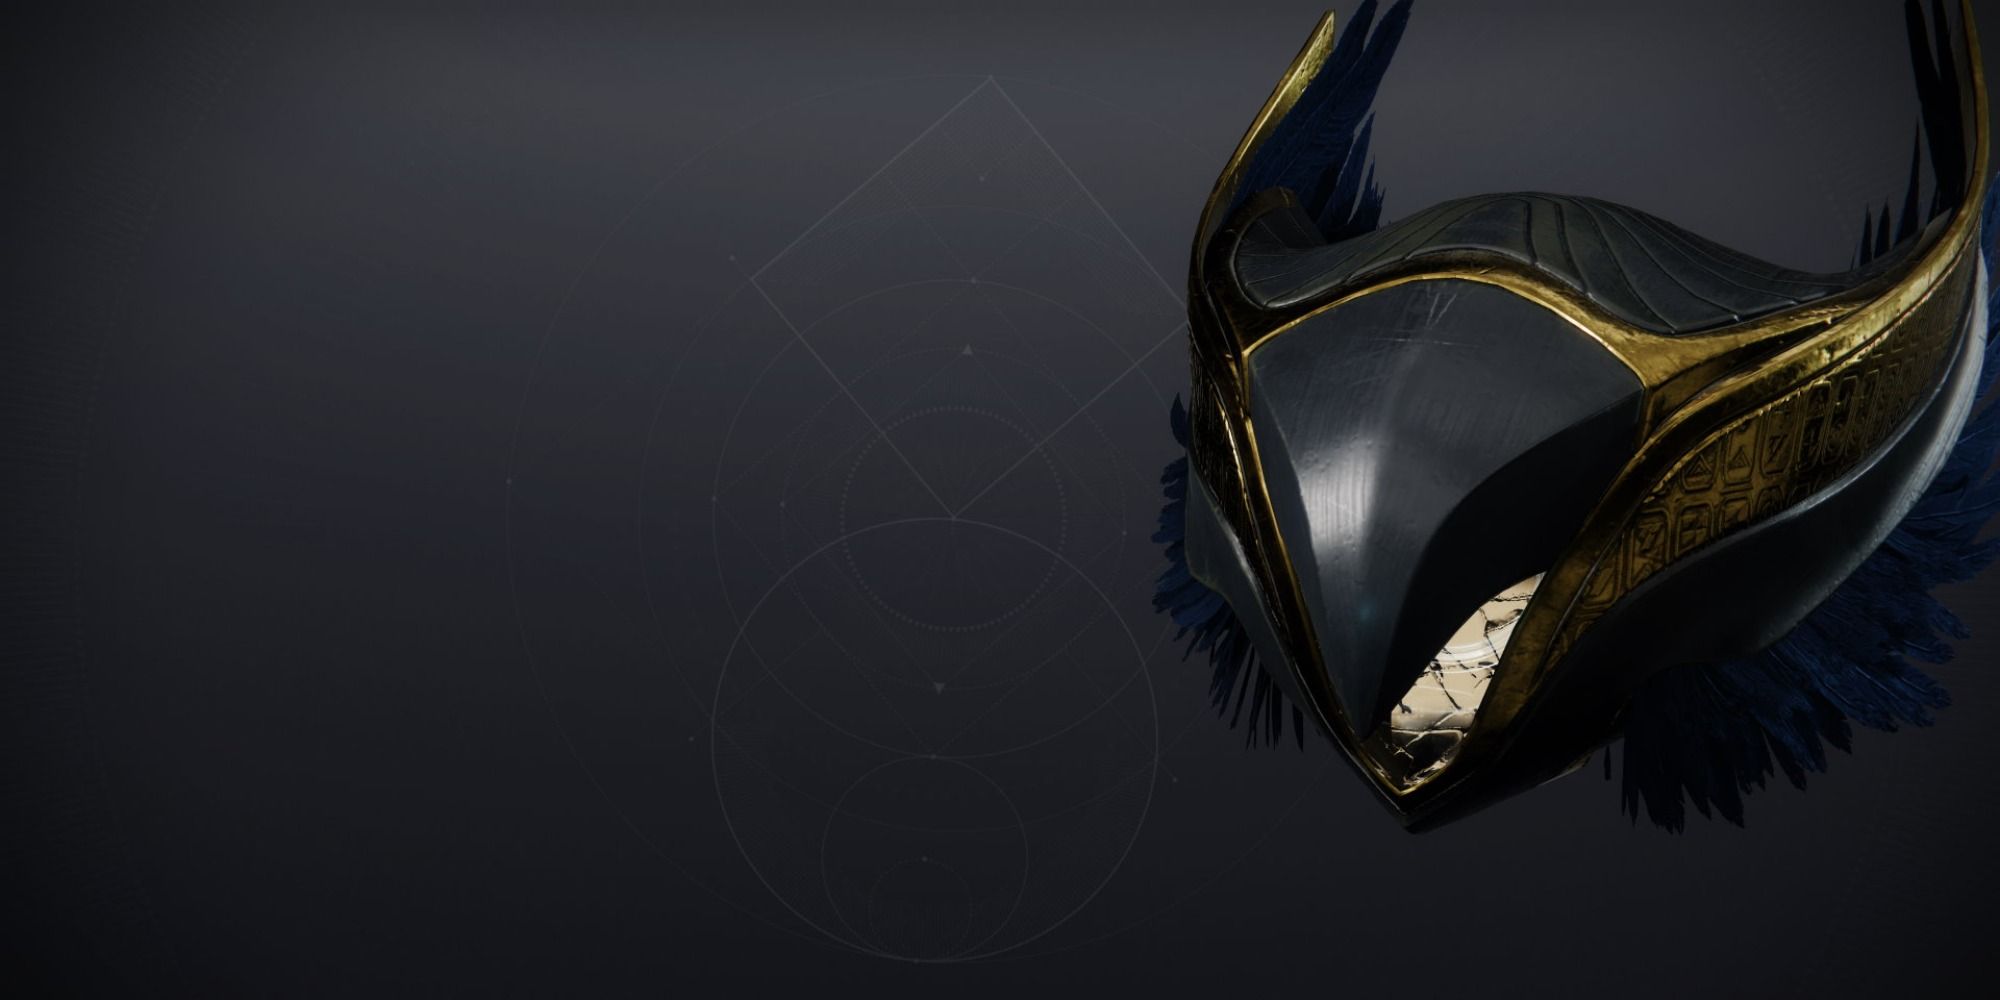 The Horus Shell Exotic Ghost Shell is Destiny 2